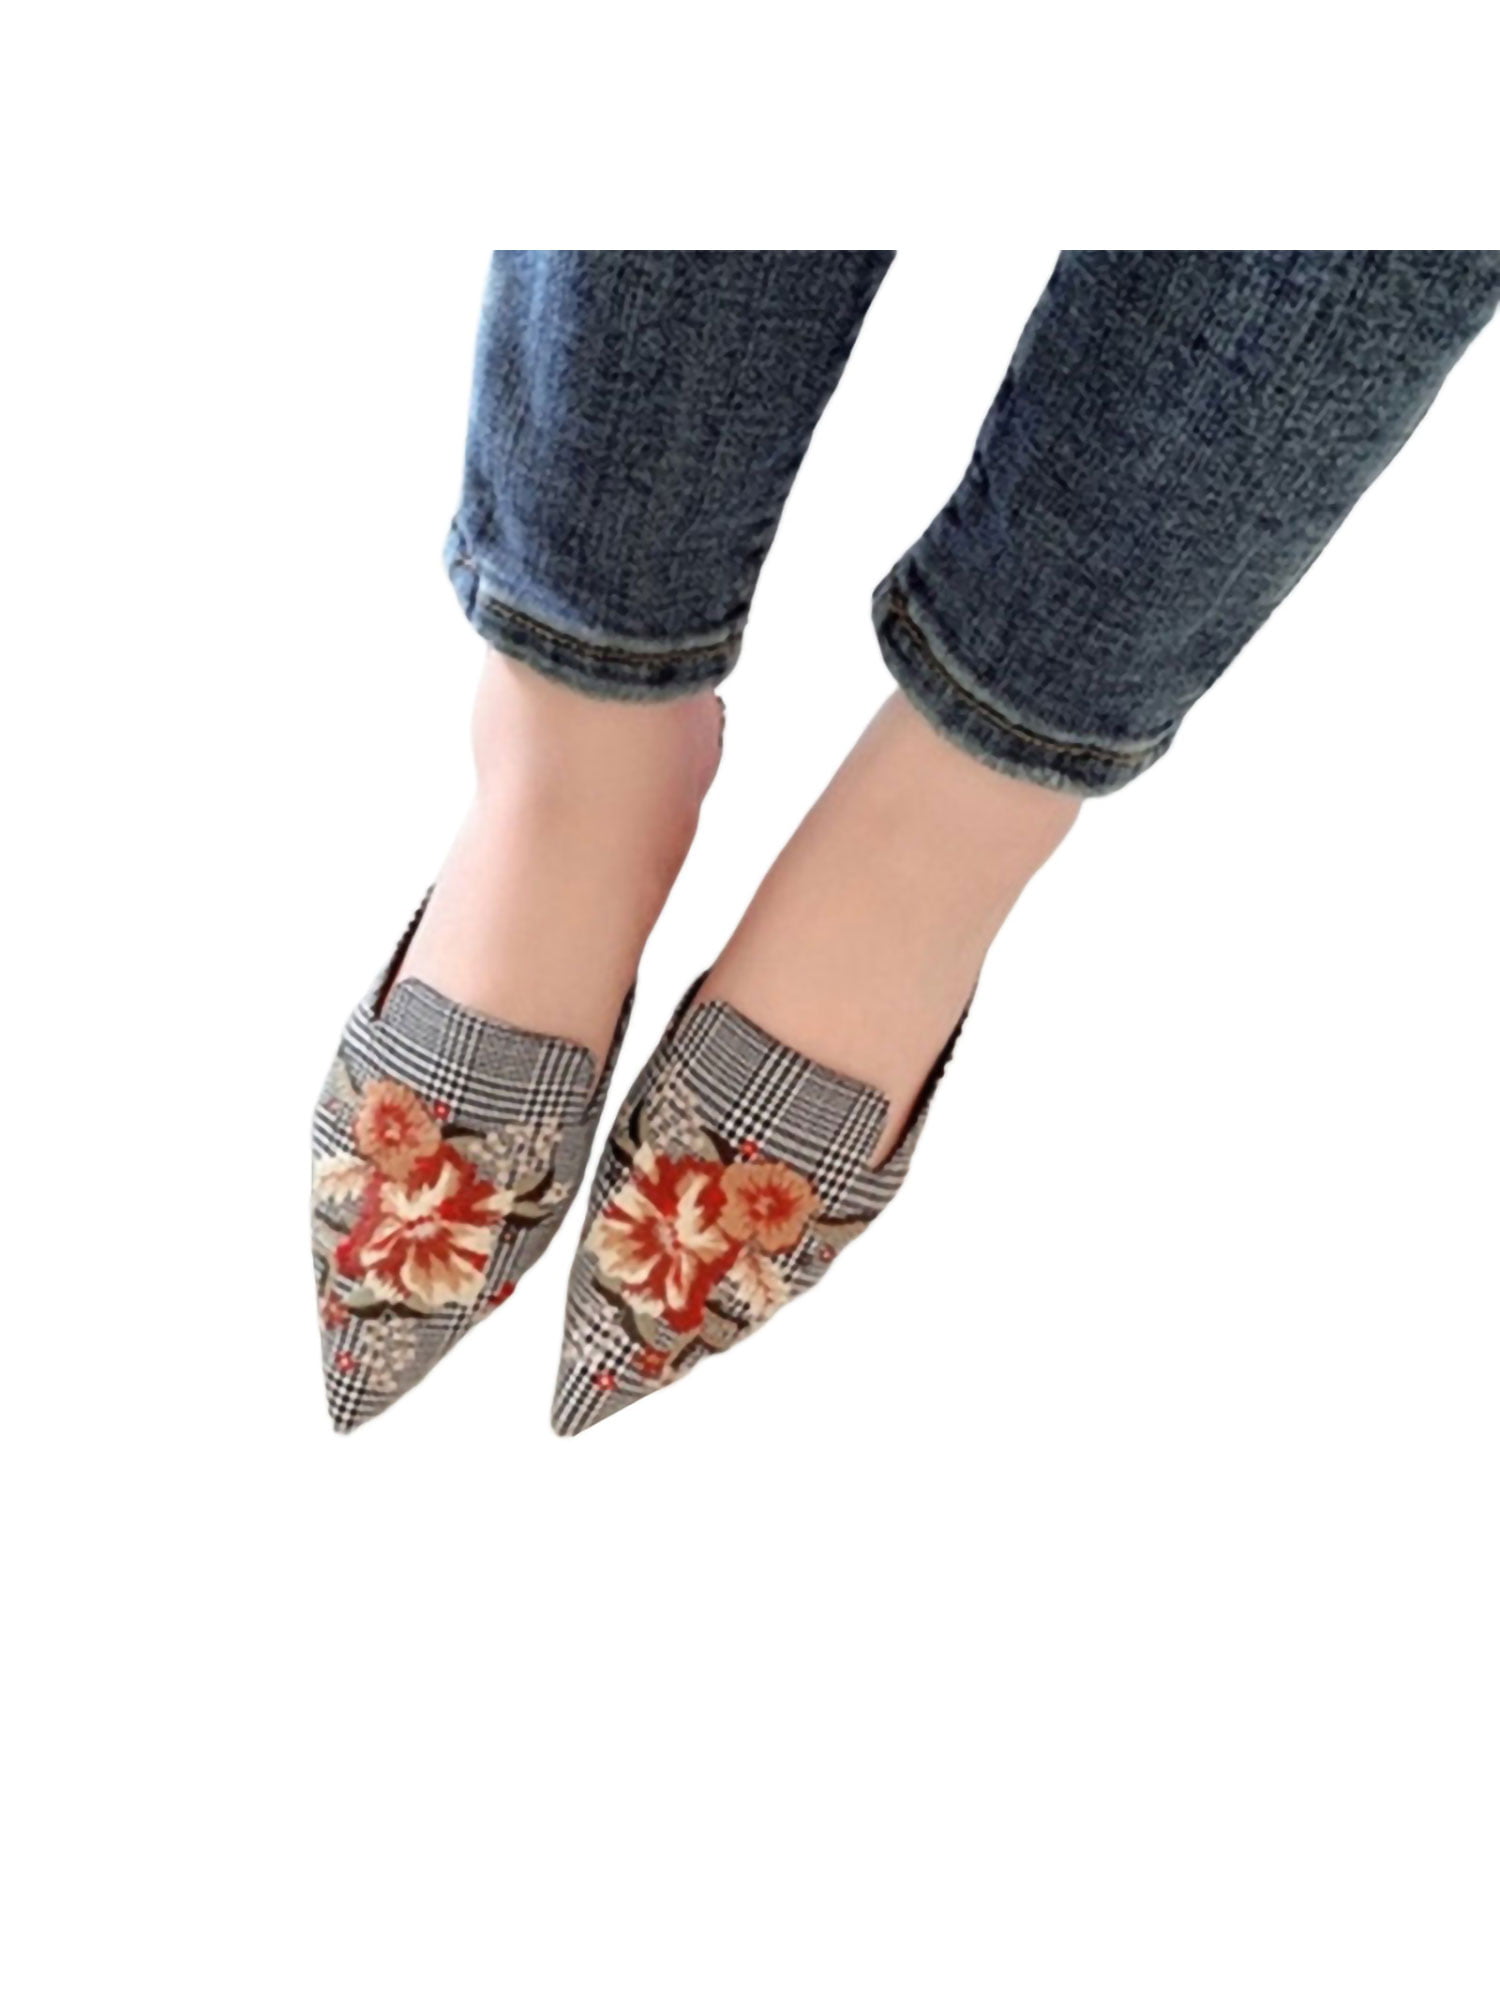 Summer Womens Flower Embroidery Slip On Loafers Slippers Sandals Mules Shoes sz 